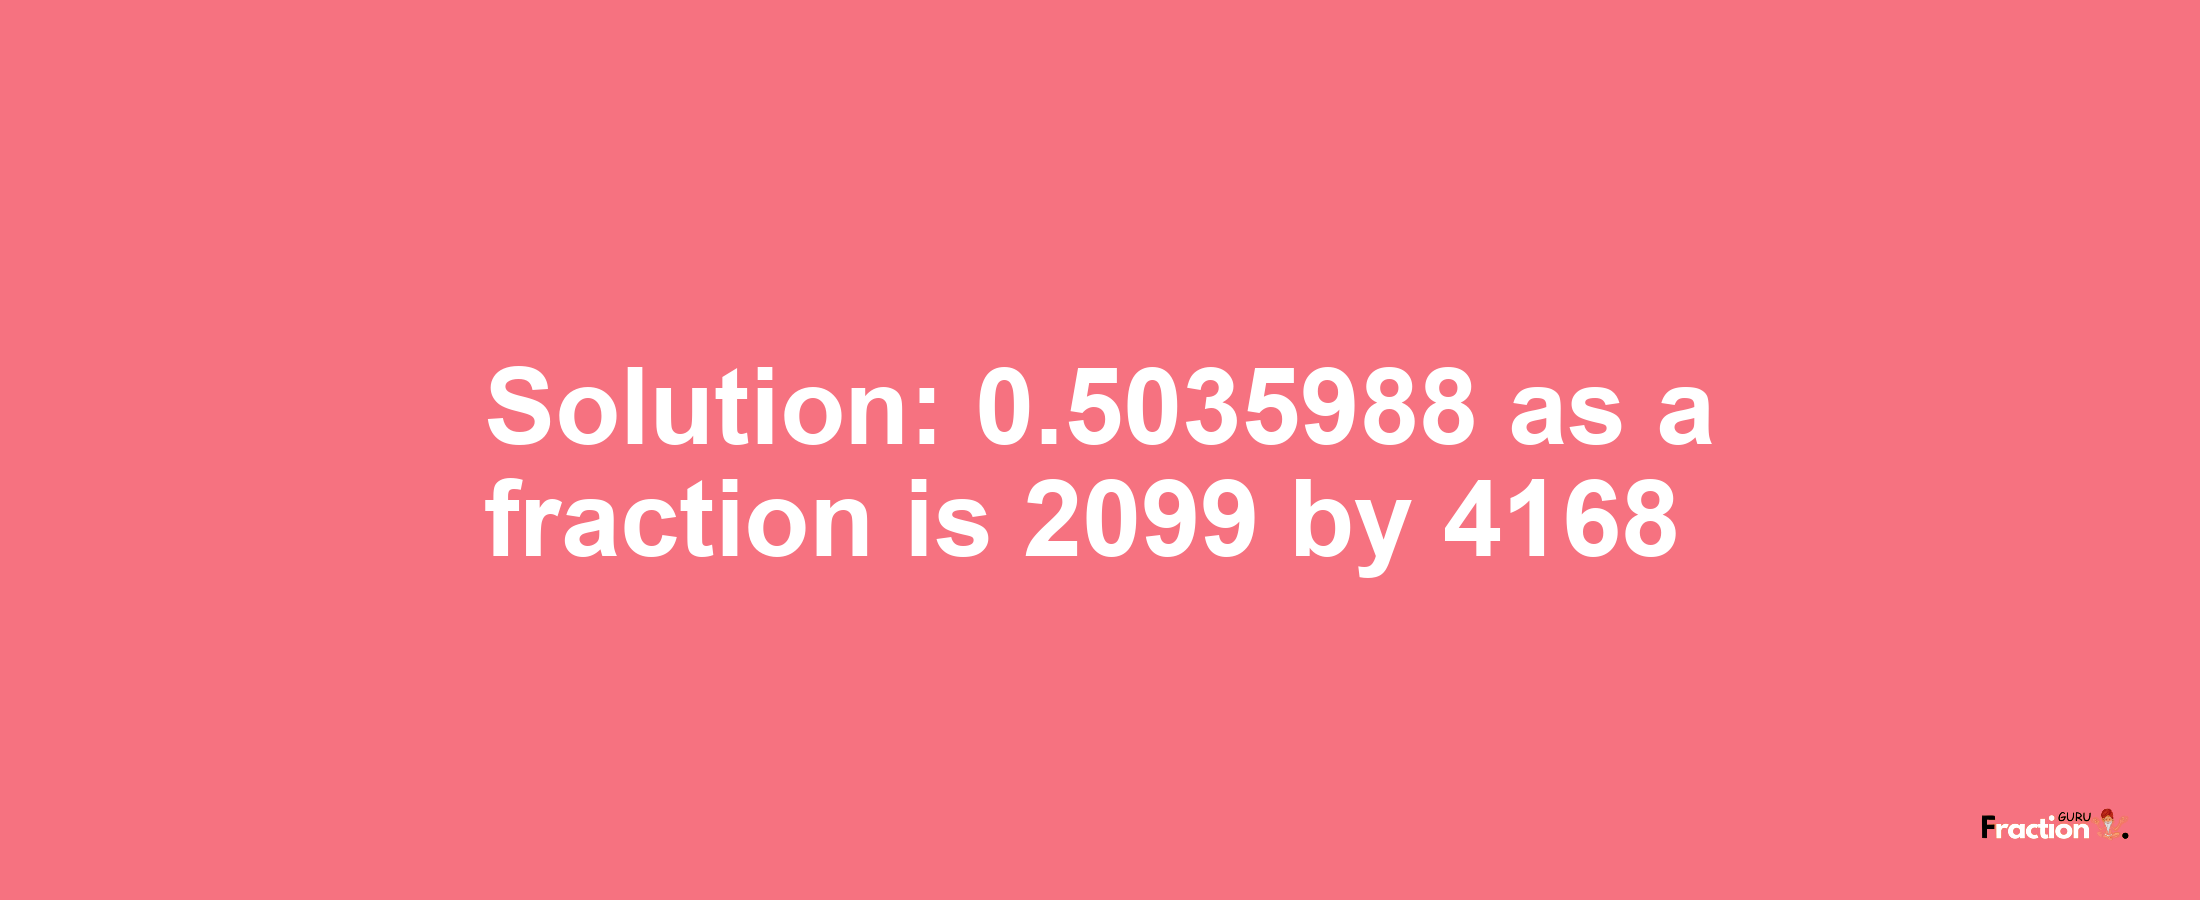 Solution:0.5035988 as a fraction is 2099/4168